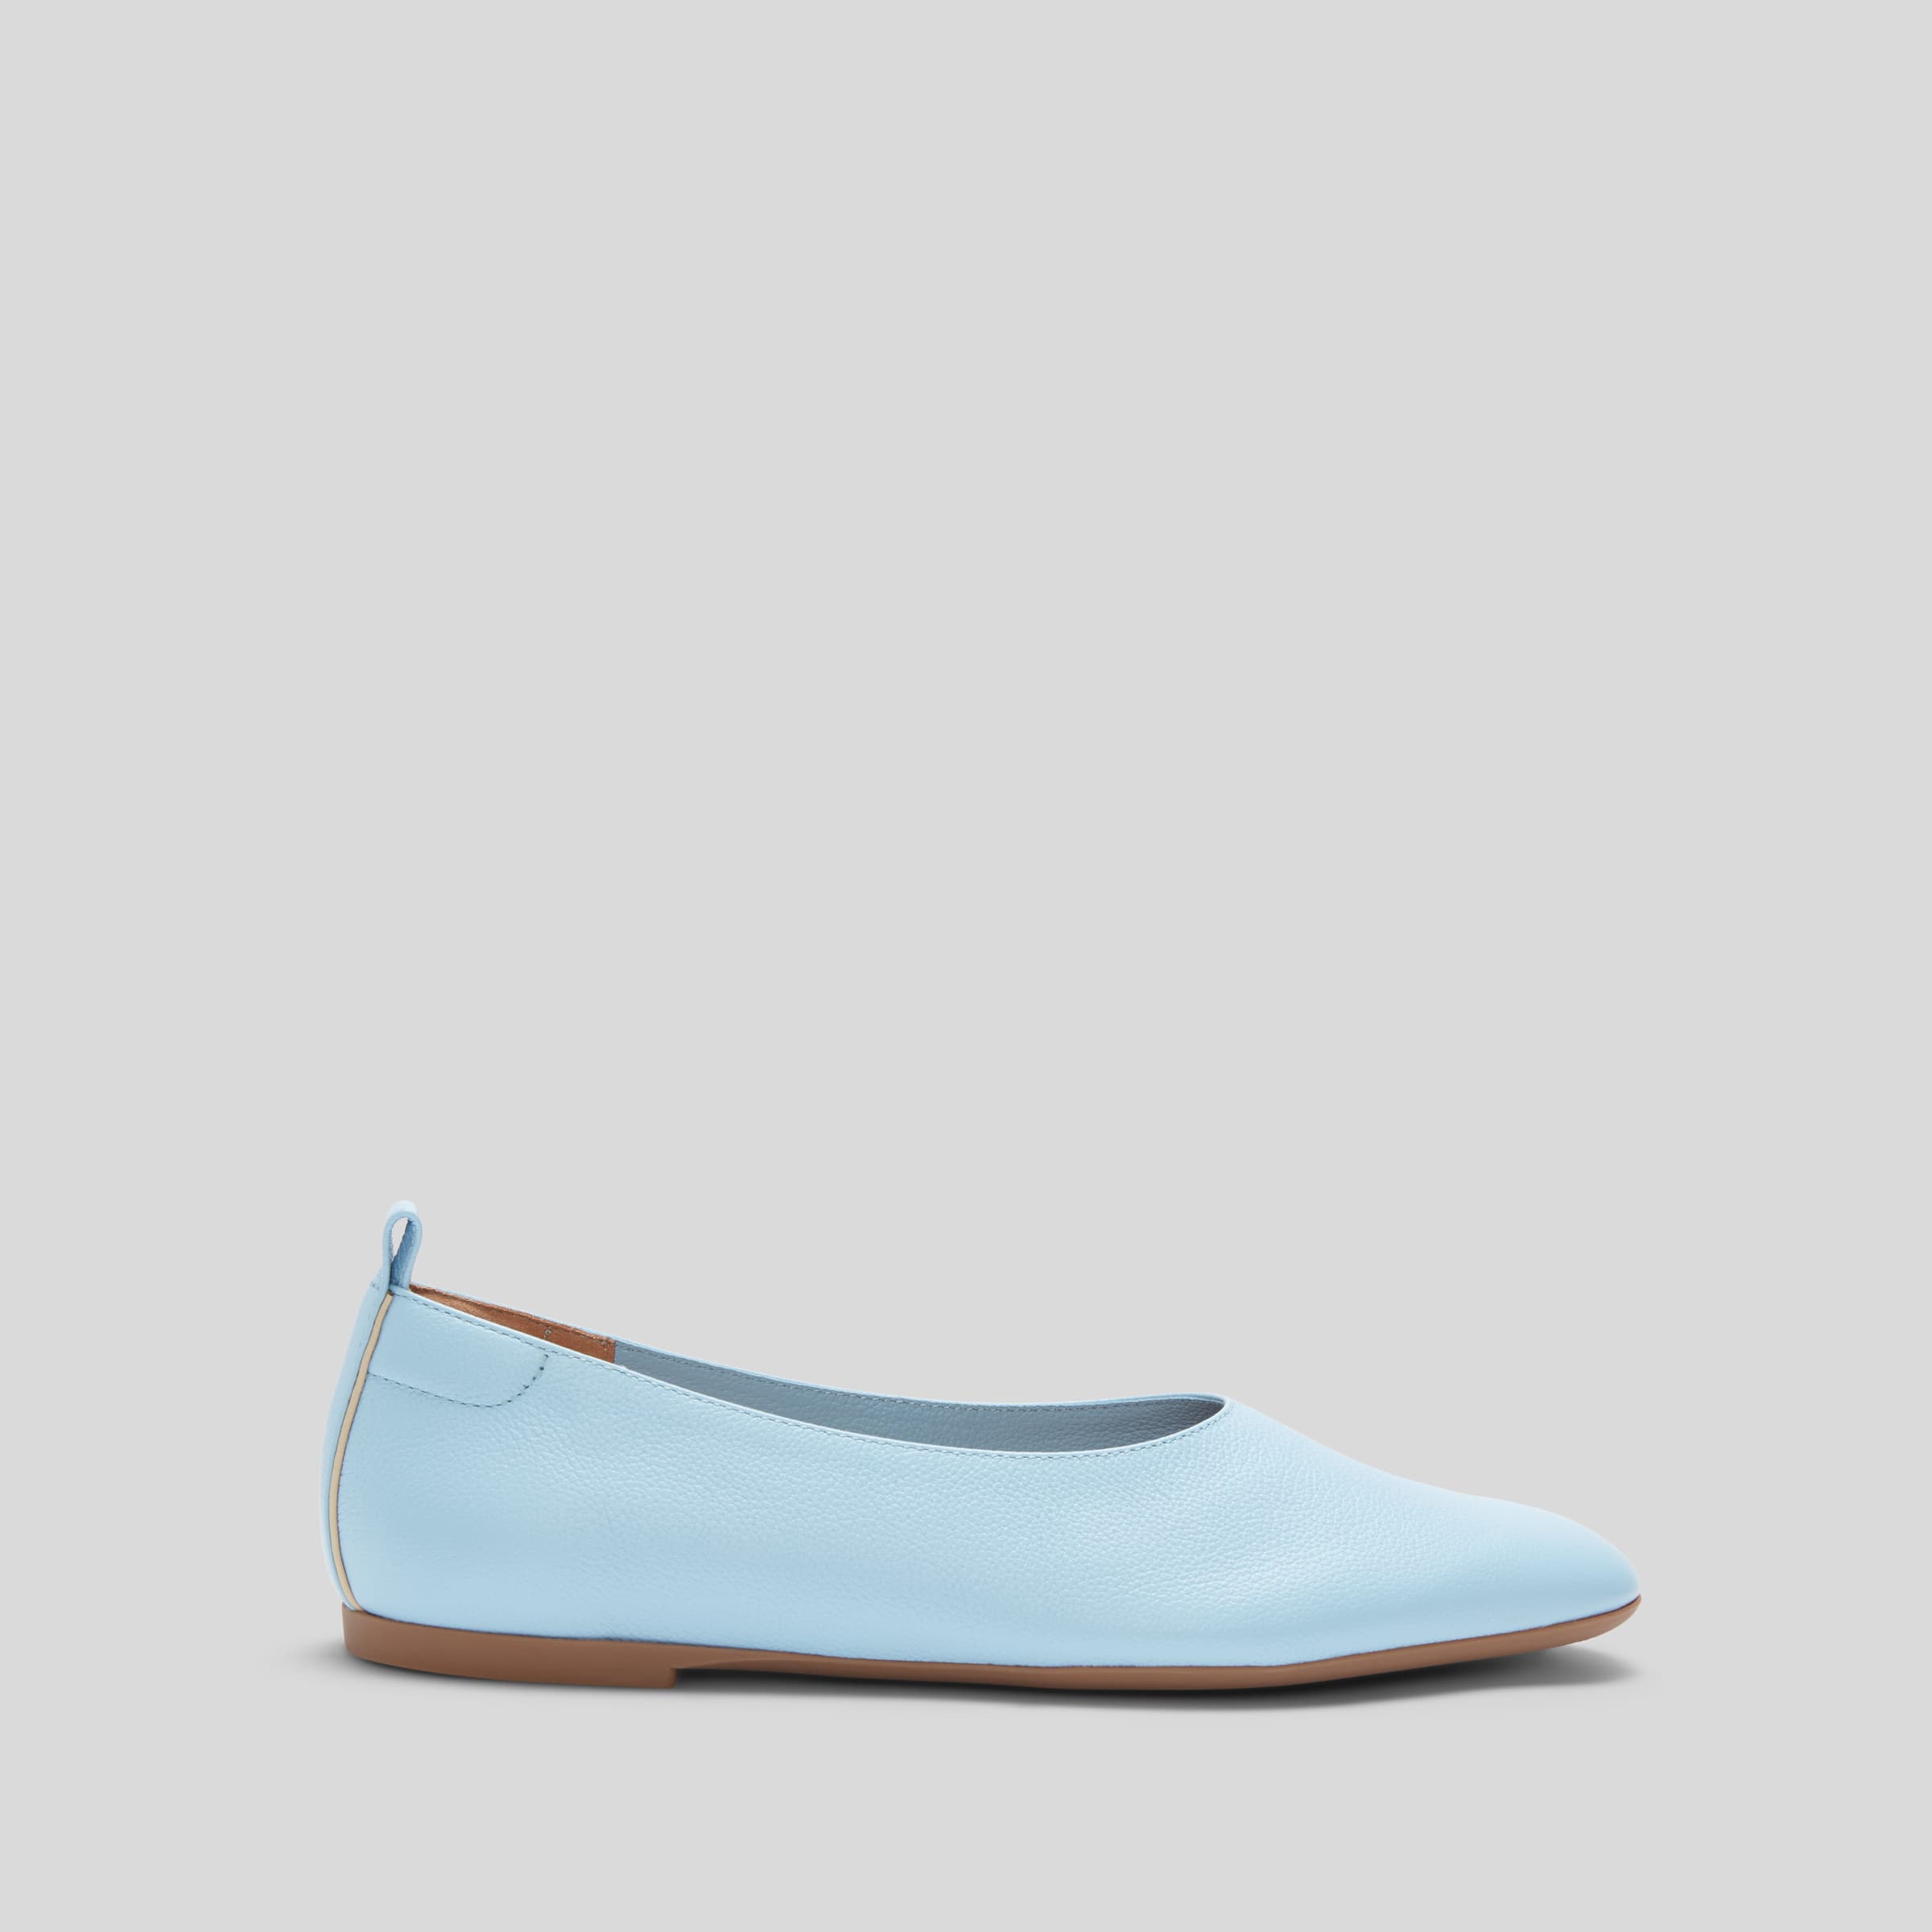 The Day Glove Clear Sky Blue – Everlane